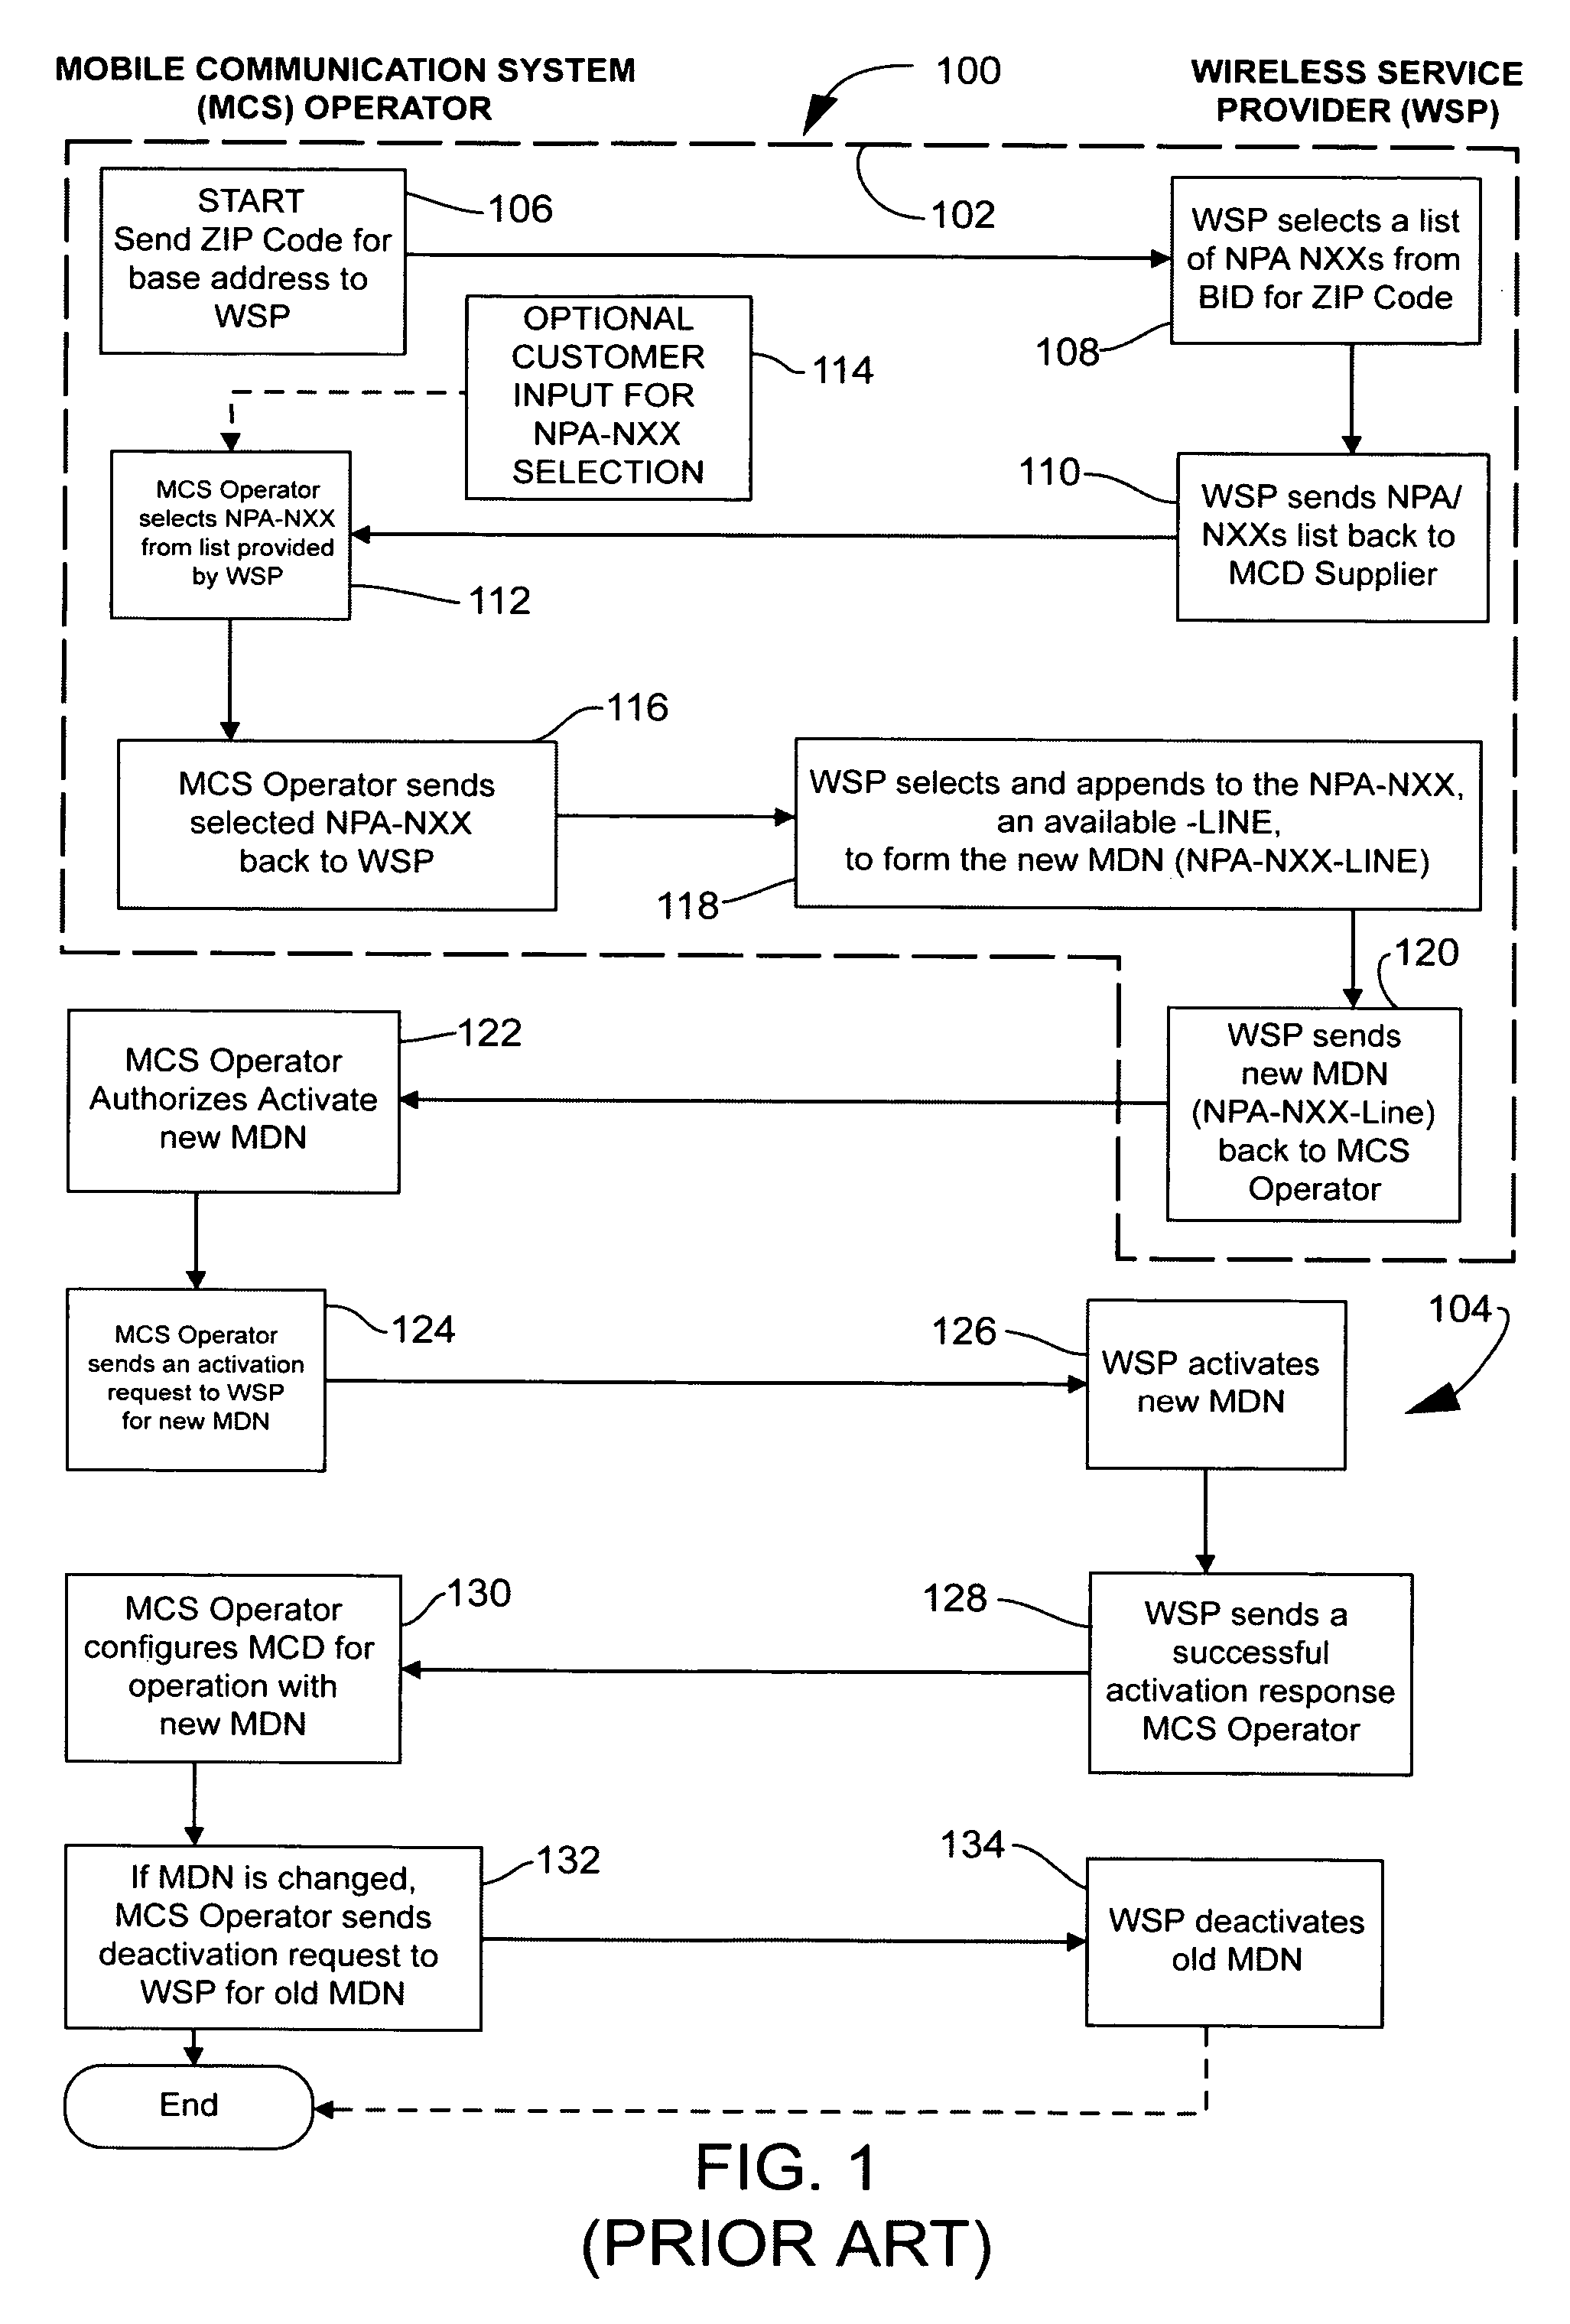 Assigning a local access telephone number to a wireless mobile communication device